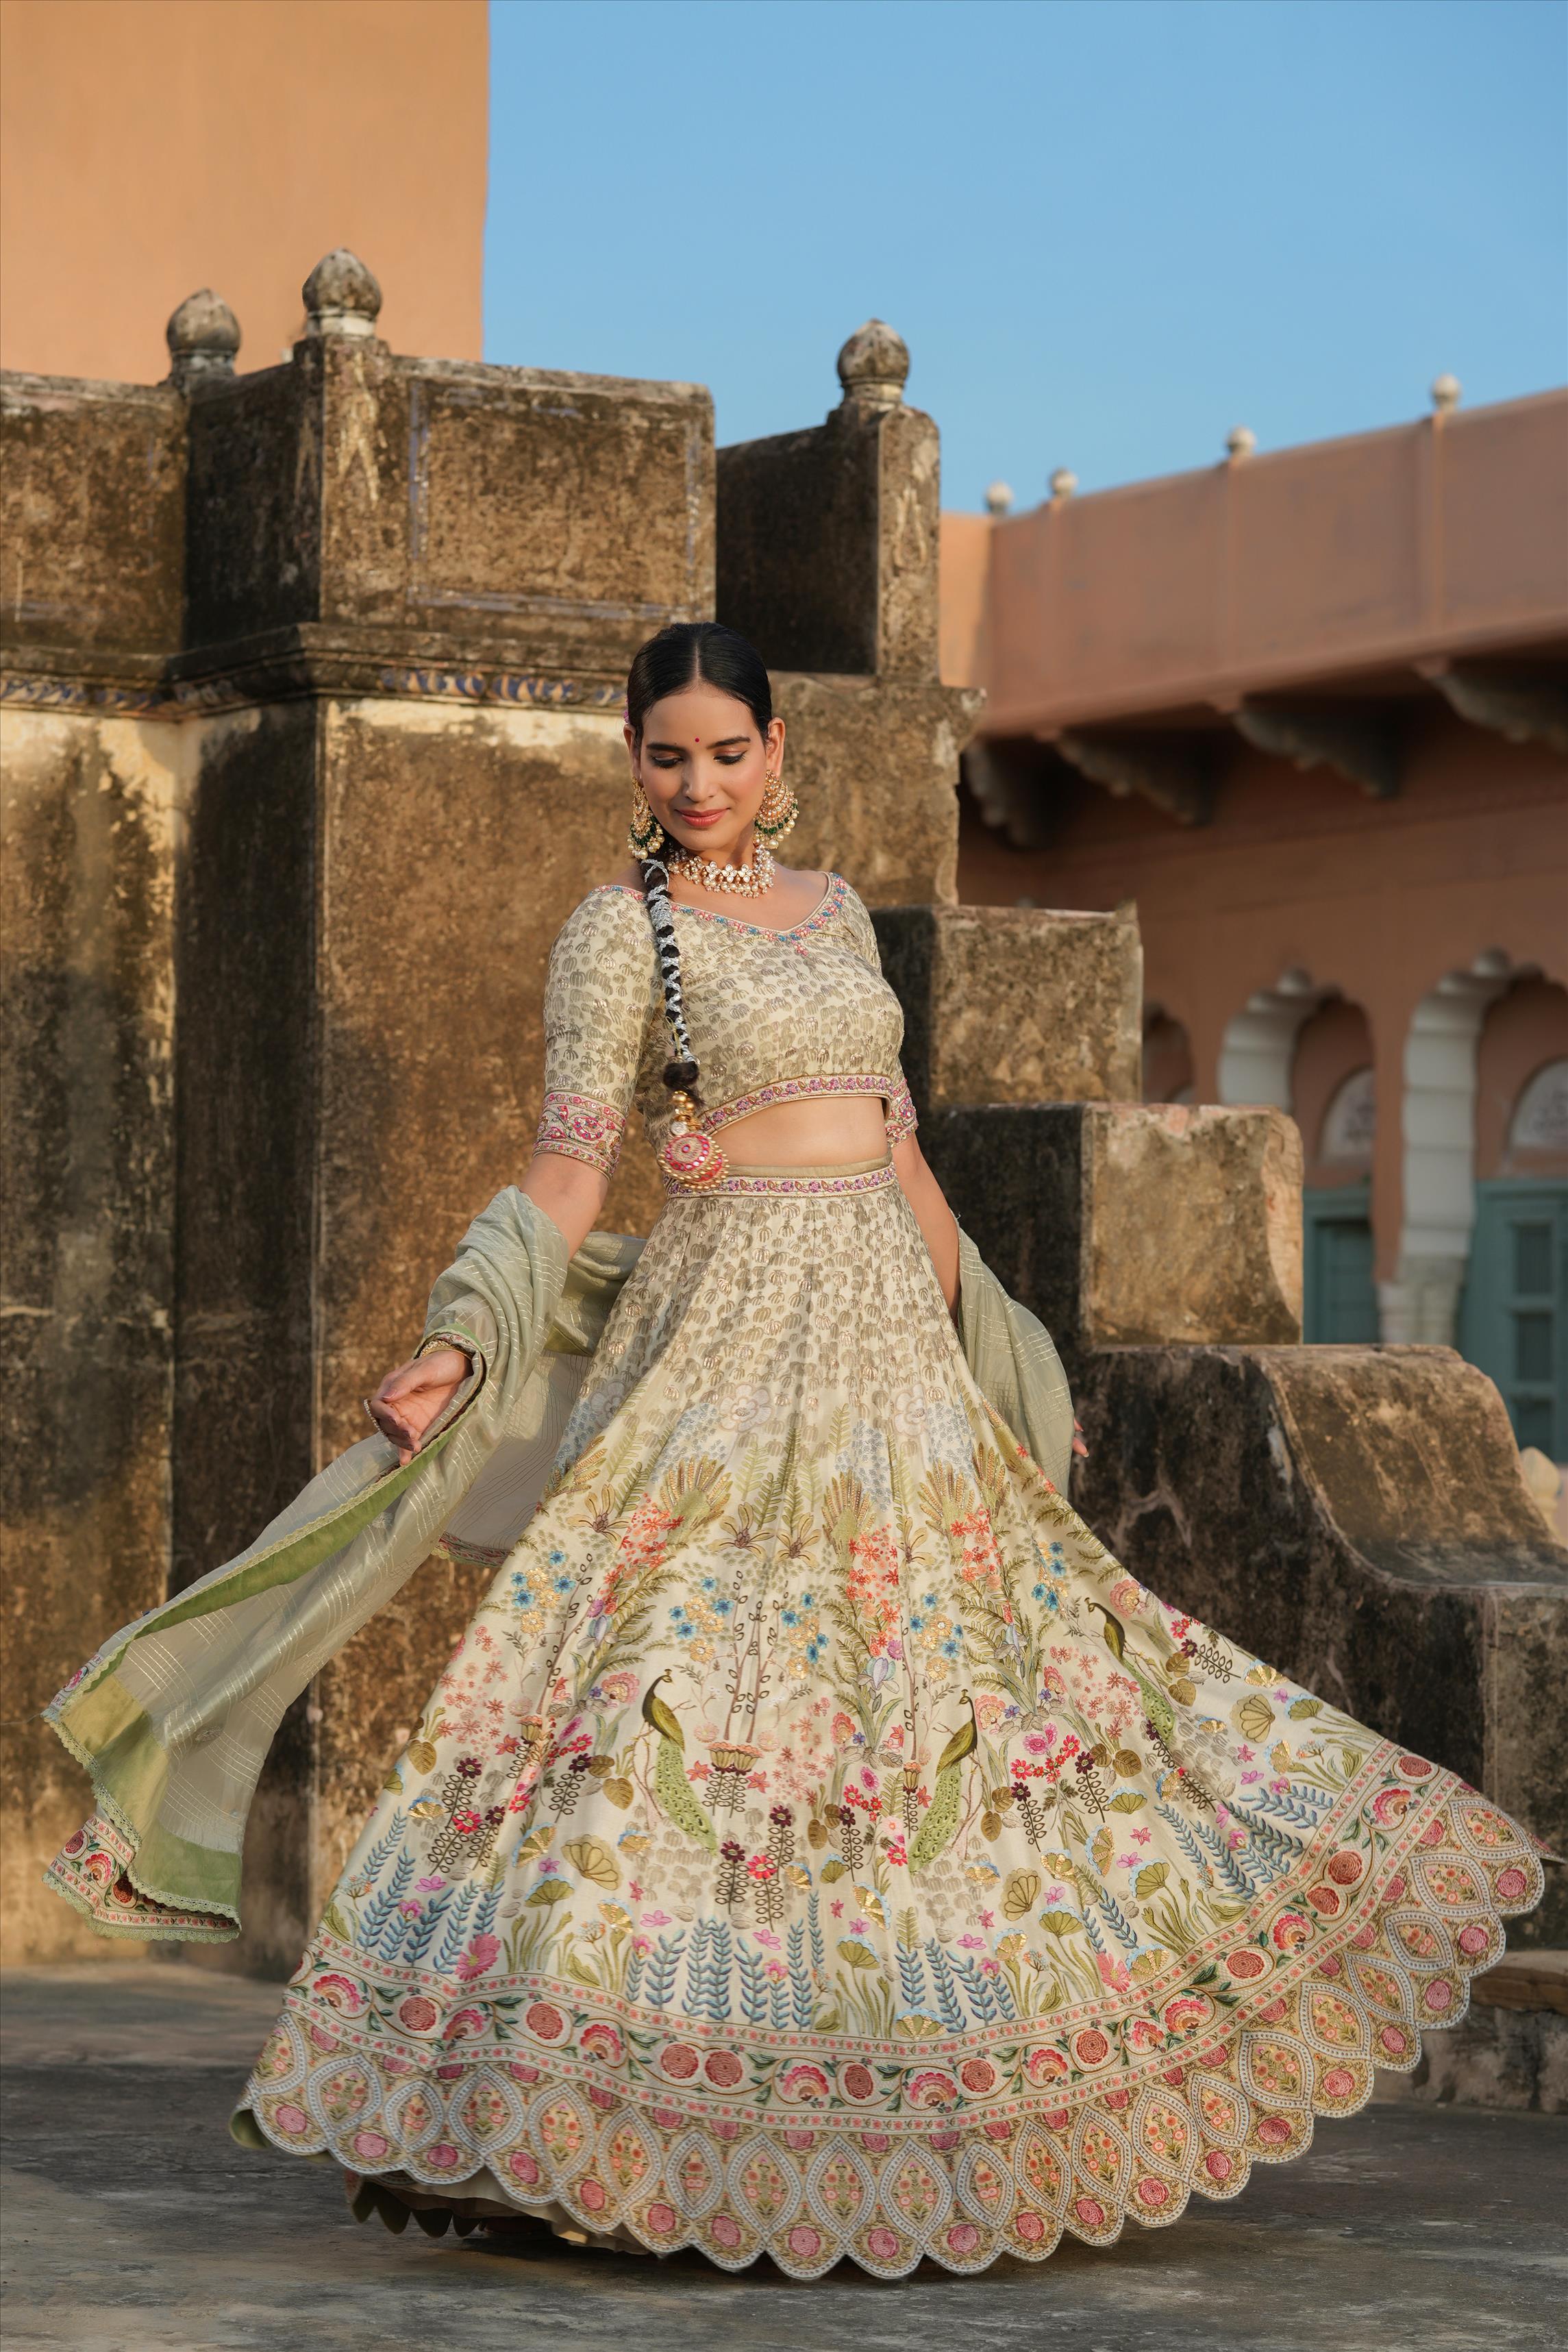 PISTAGREEN RAW SILK HAND PAINTED FLORAL PRINT WITH EMBROIDERY LEHENGA CHOLI SET WITH DUPATTA